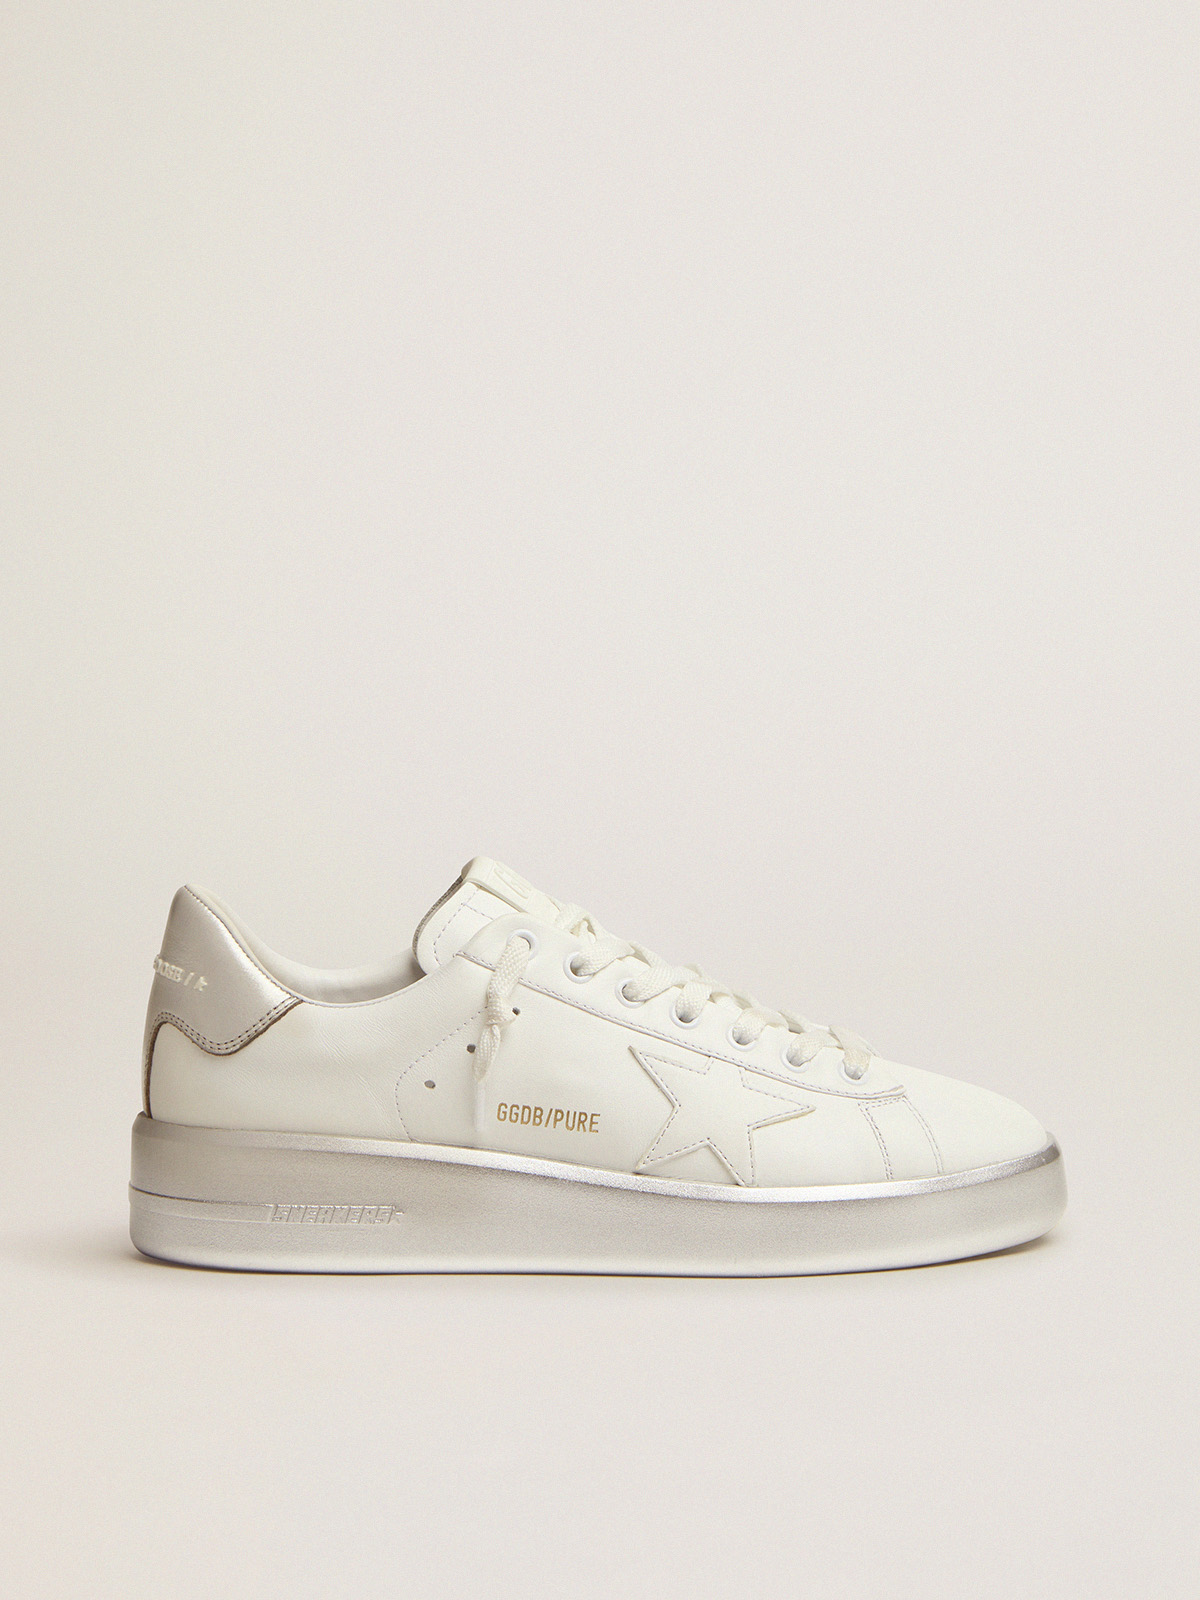 Purestar sneakers in leather with silver laminated heel tab and foxing |  Golden Goose